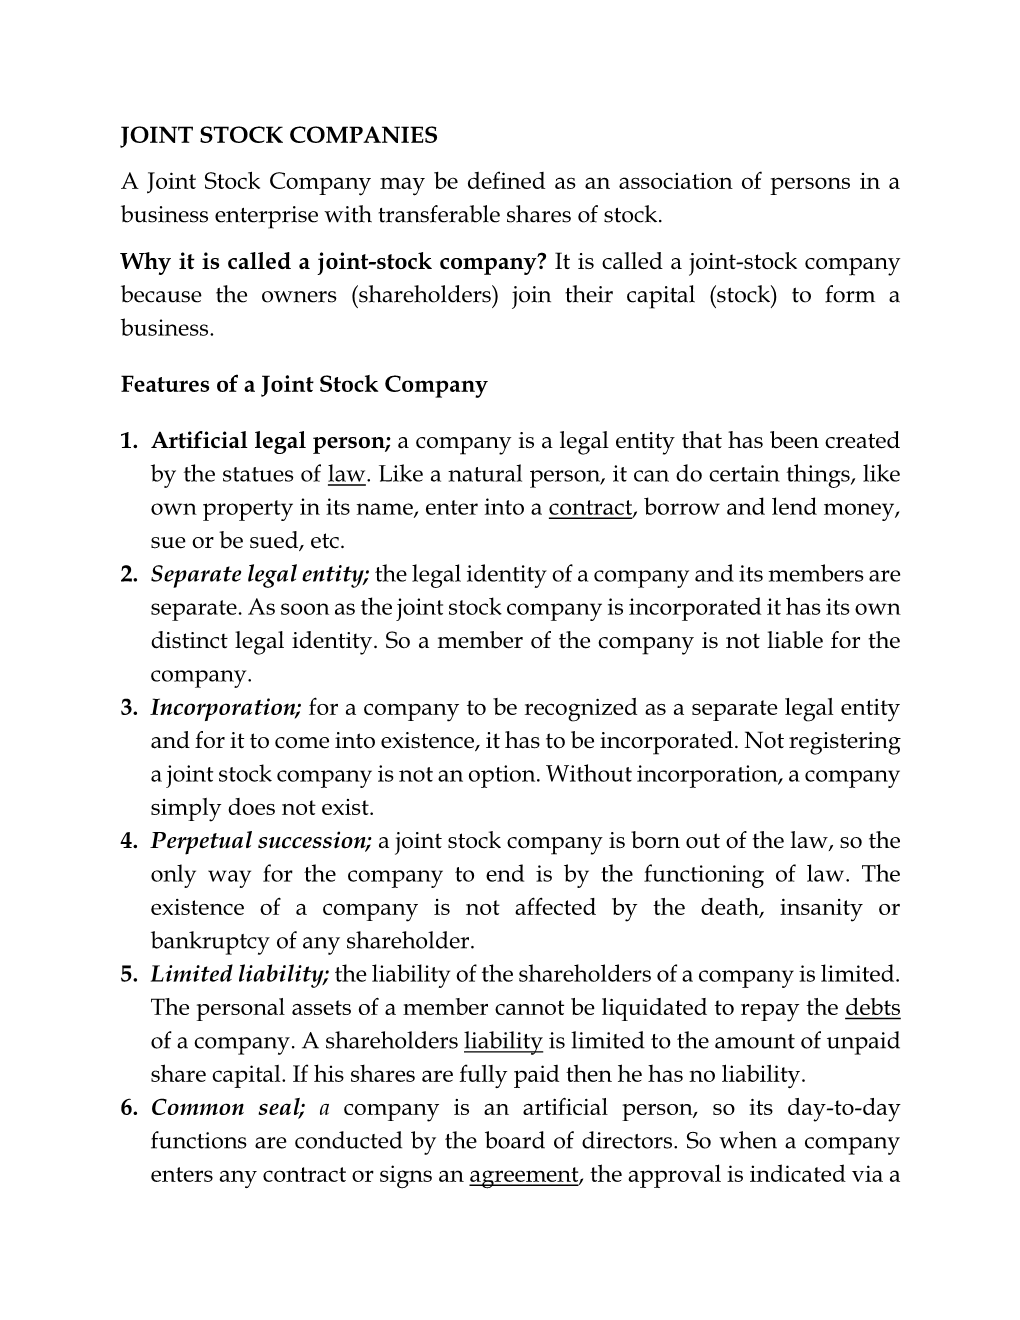 JOINT STOCK COMPANIES a Joint Stock Company May Be Defined As an Association of Persons in a Business Enterprise with Transferable Shares of Stock